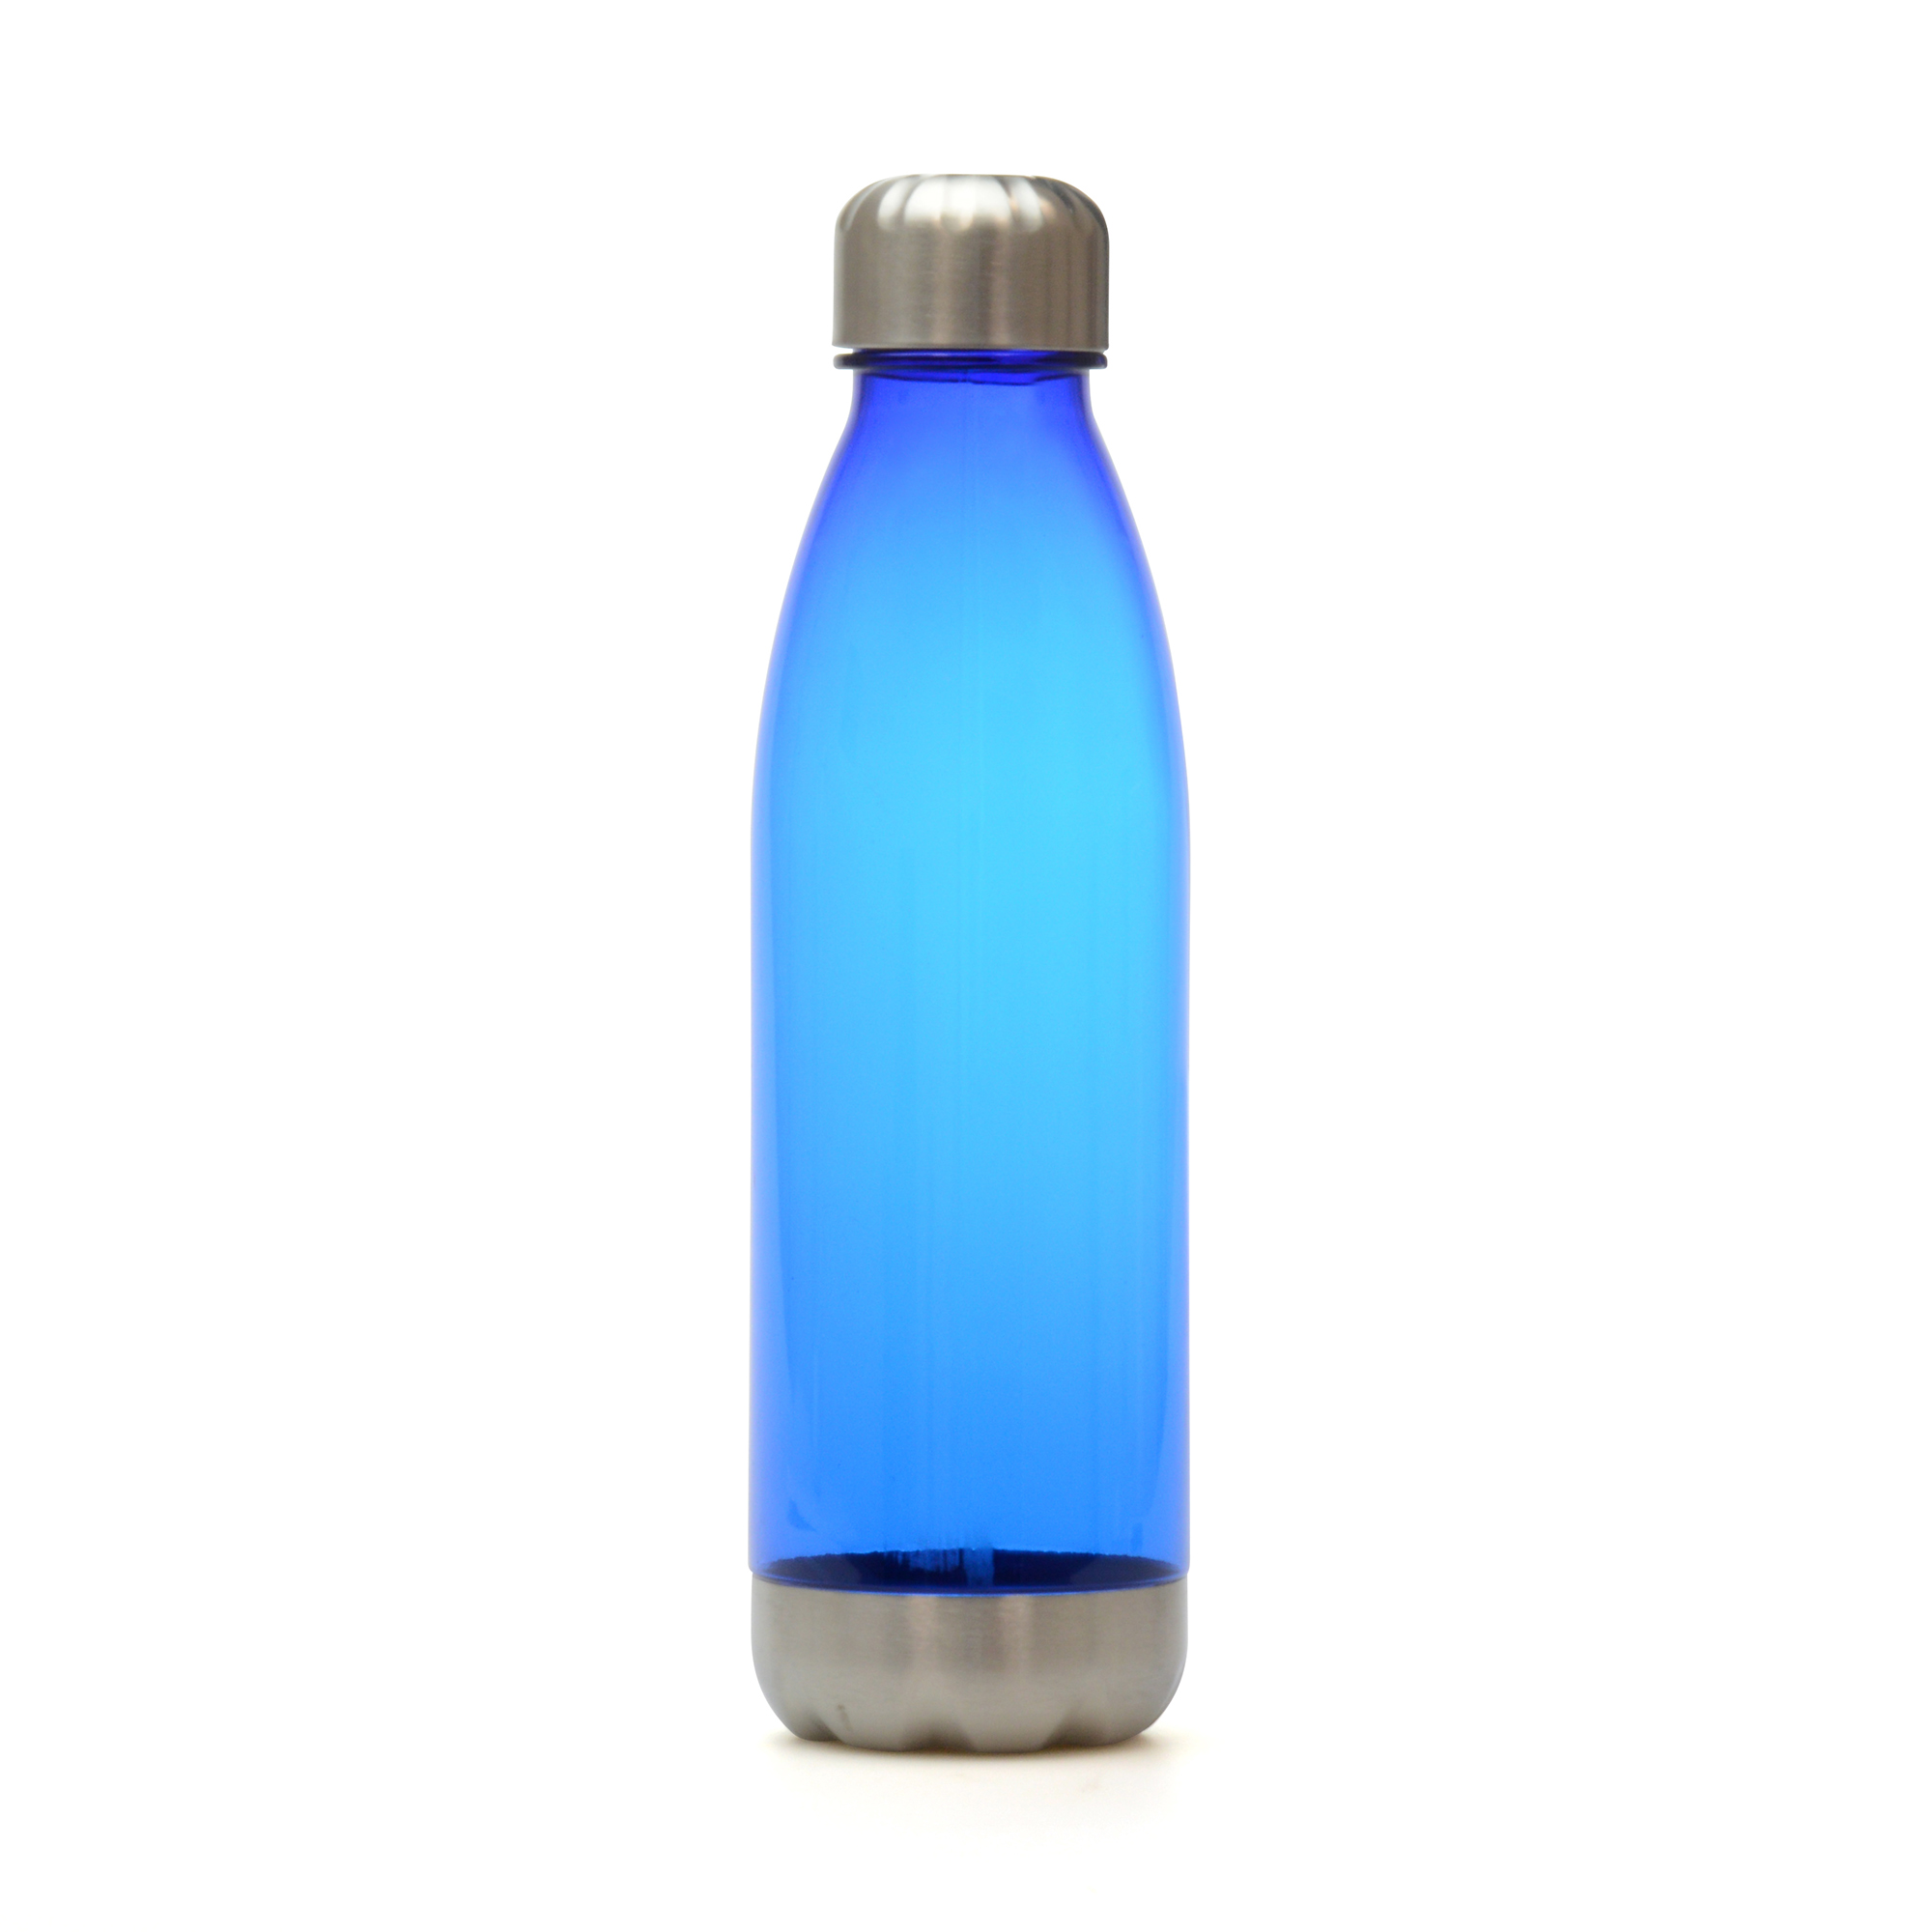 MG9133BL - REVIVE 650ml RPET AND RECYLCED STAINLESS STEEL DRINKS BOTTLE